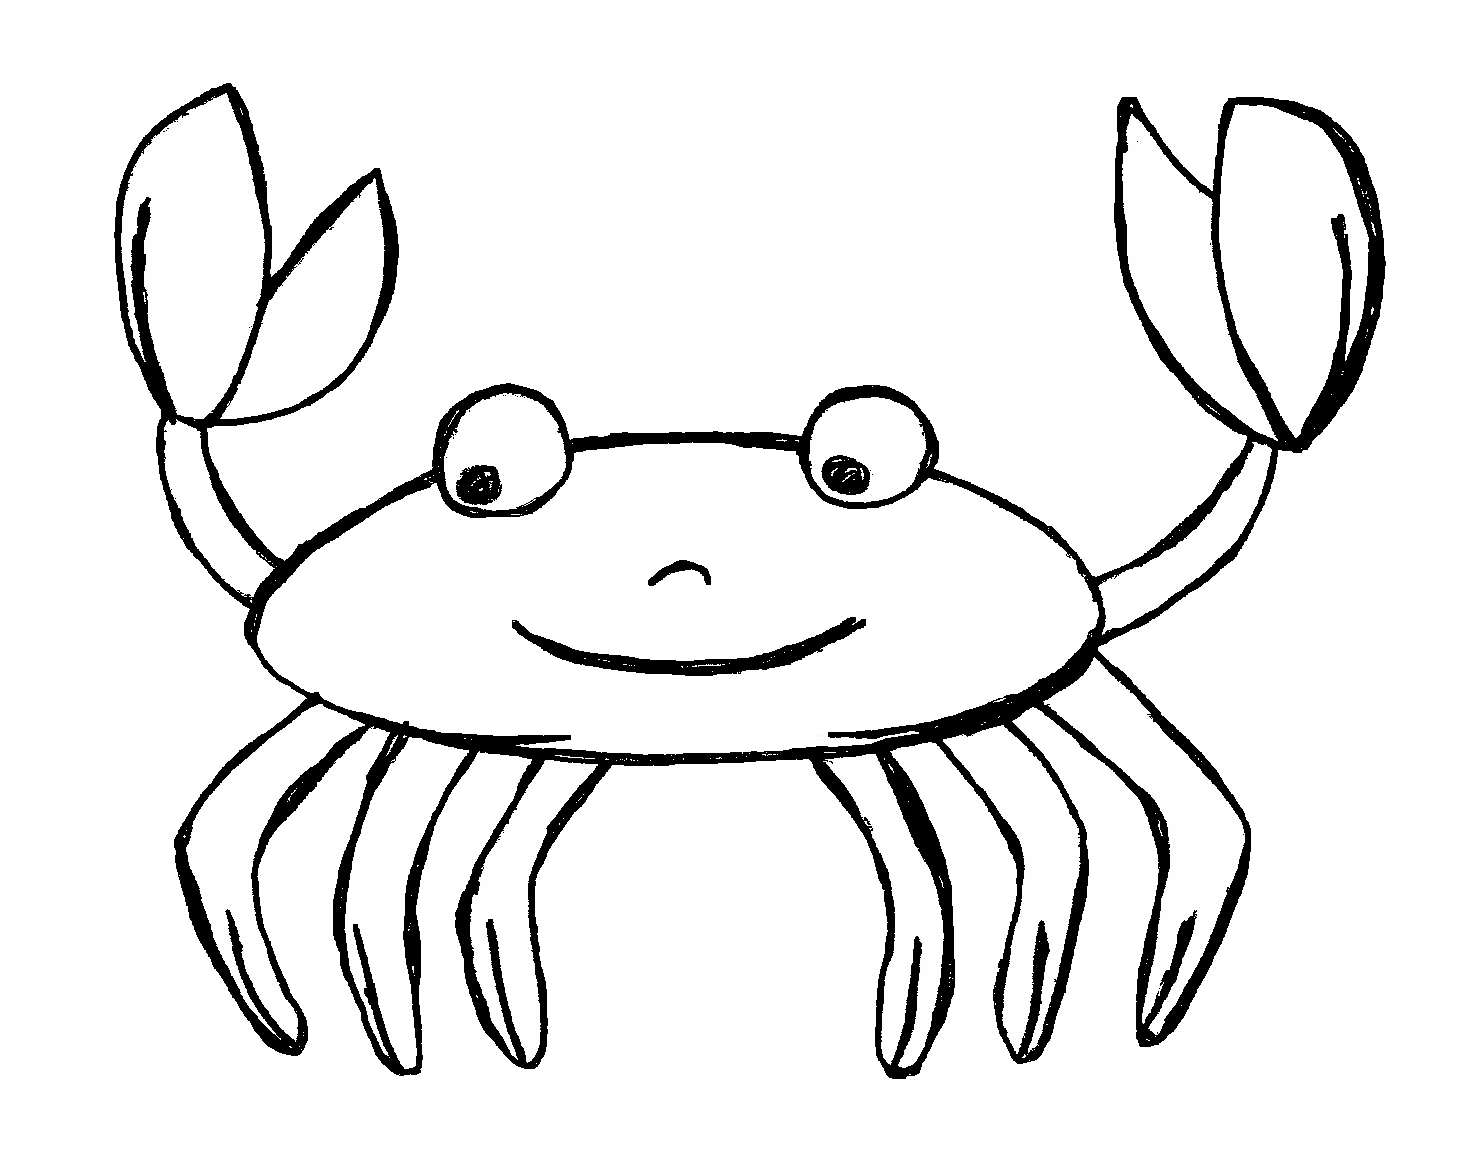 Water Animals Clipart Black And White - ClipArt Best - ClipArt Best